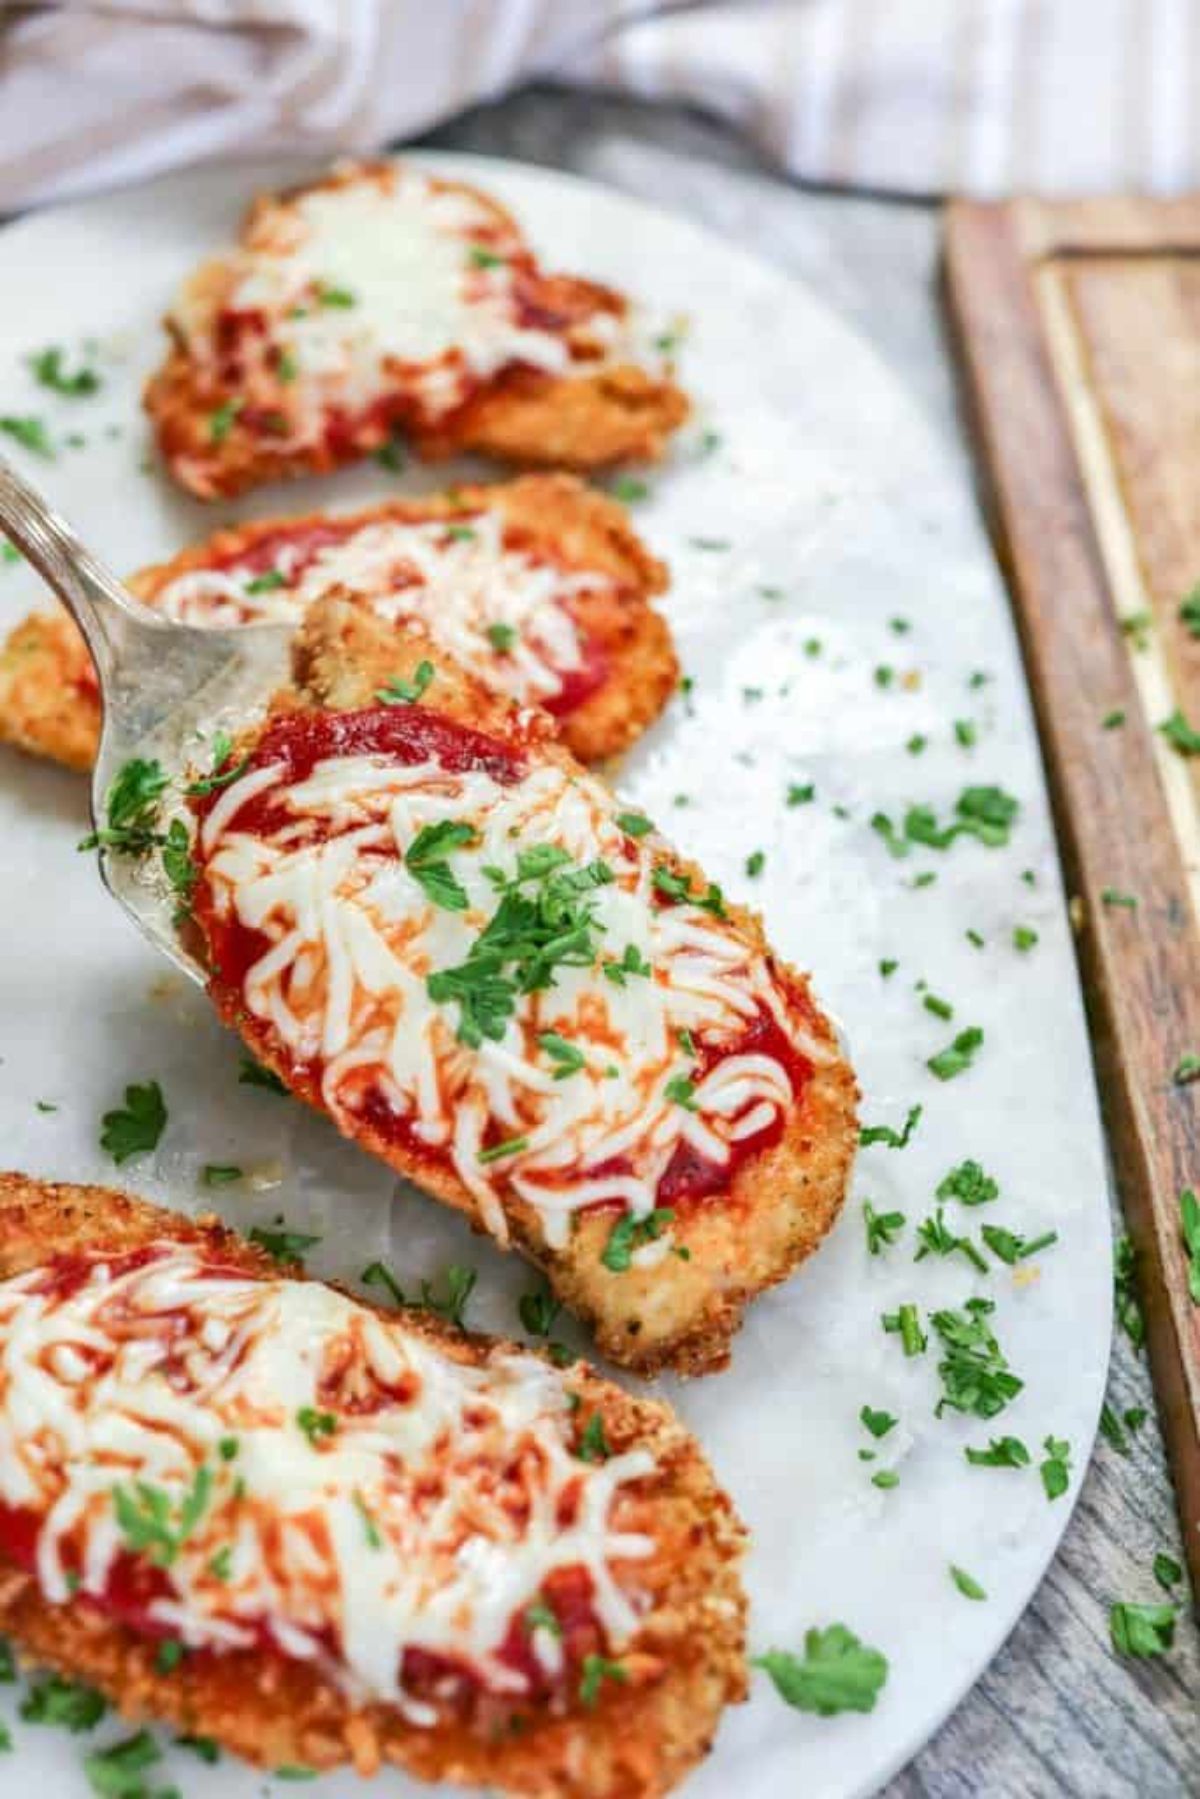 On a white oval platter are 4 chicken parmesan portions, scattered with chopped herbs